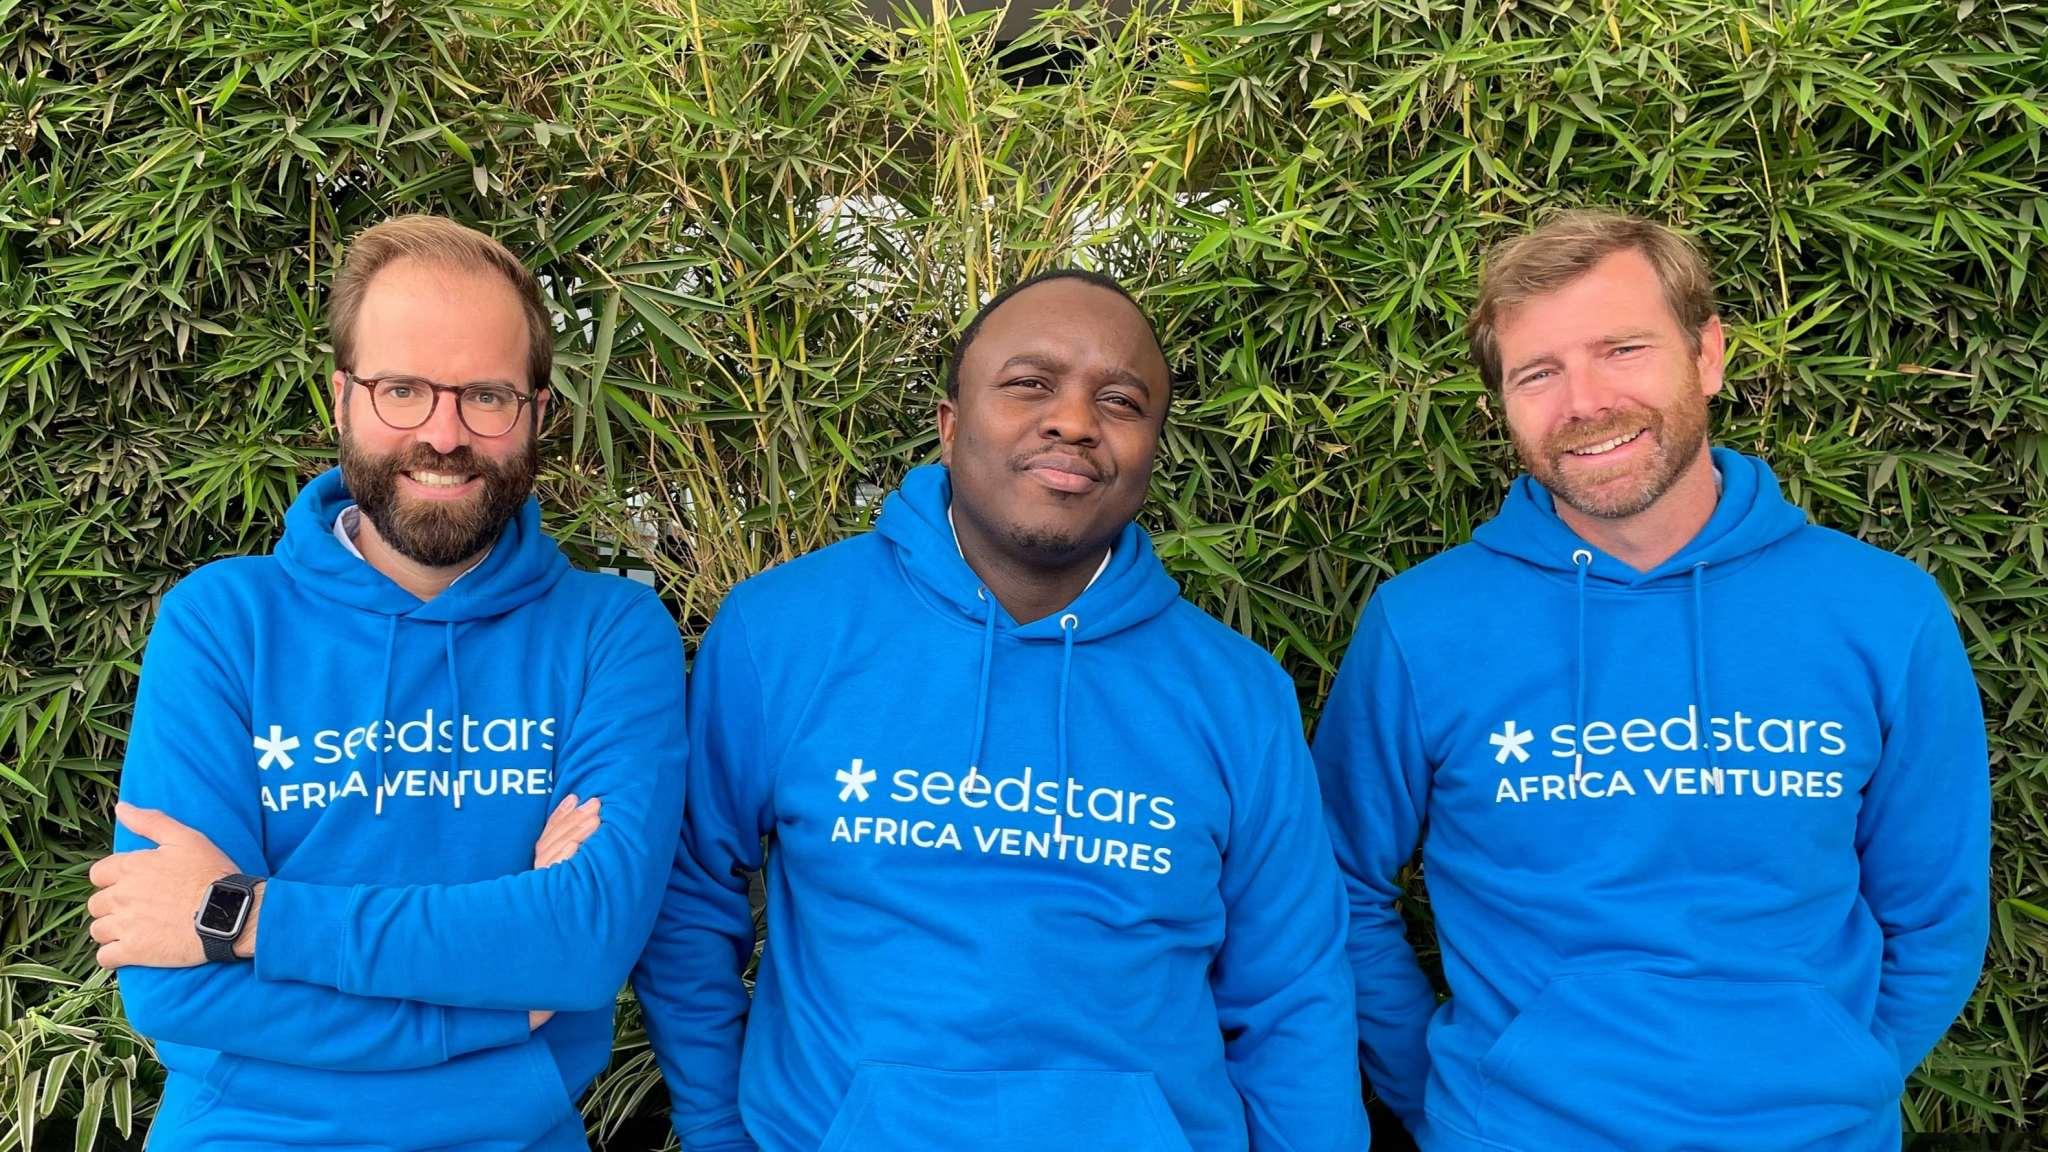 Seedstars, Fondation Botnar launch new fund to back African startups focused on youth wellbeing